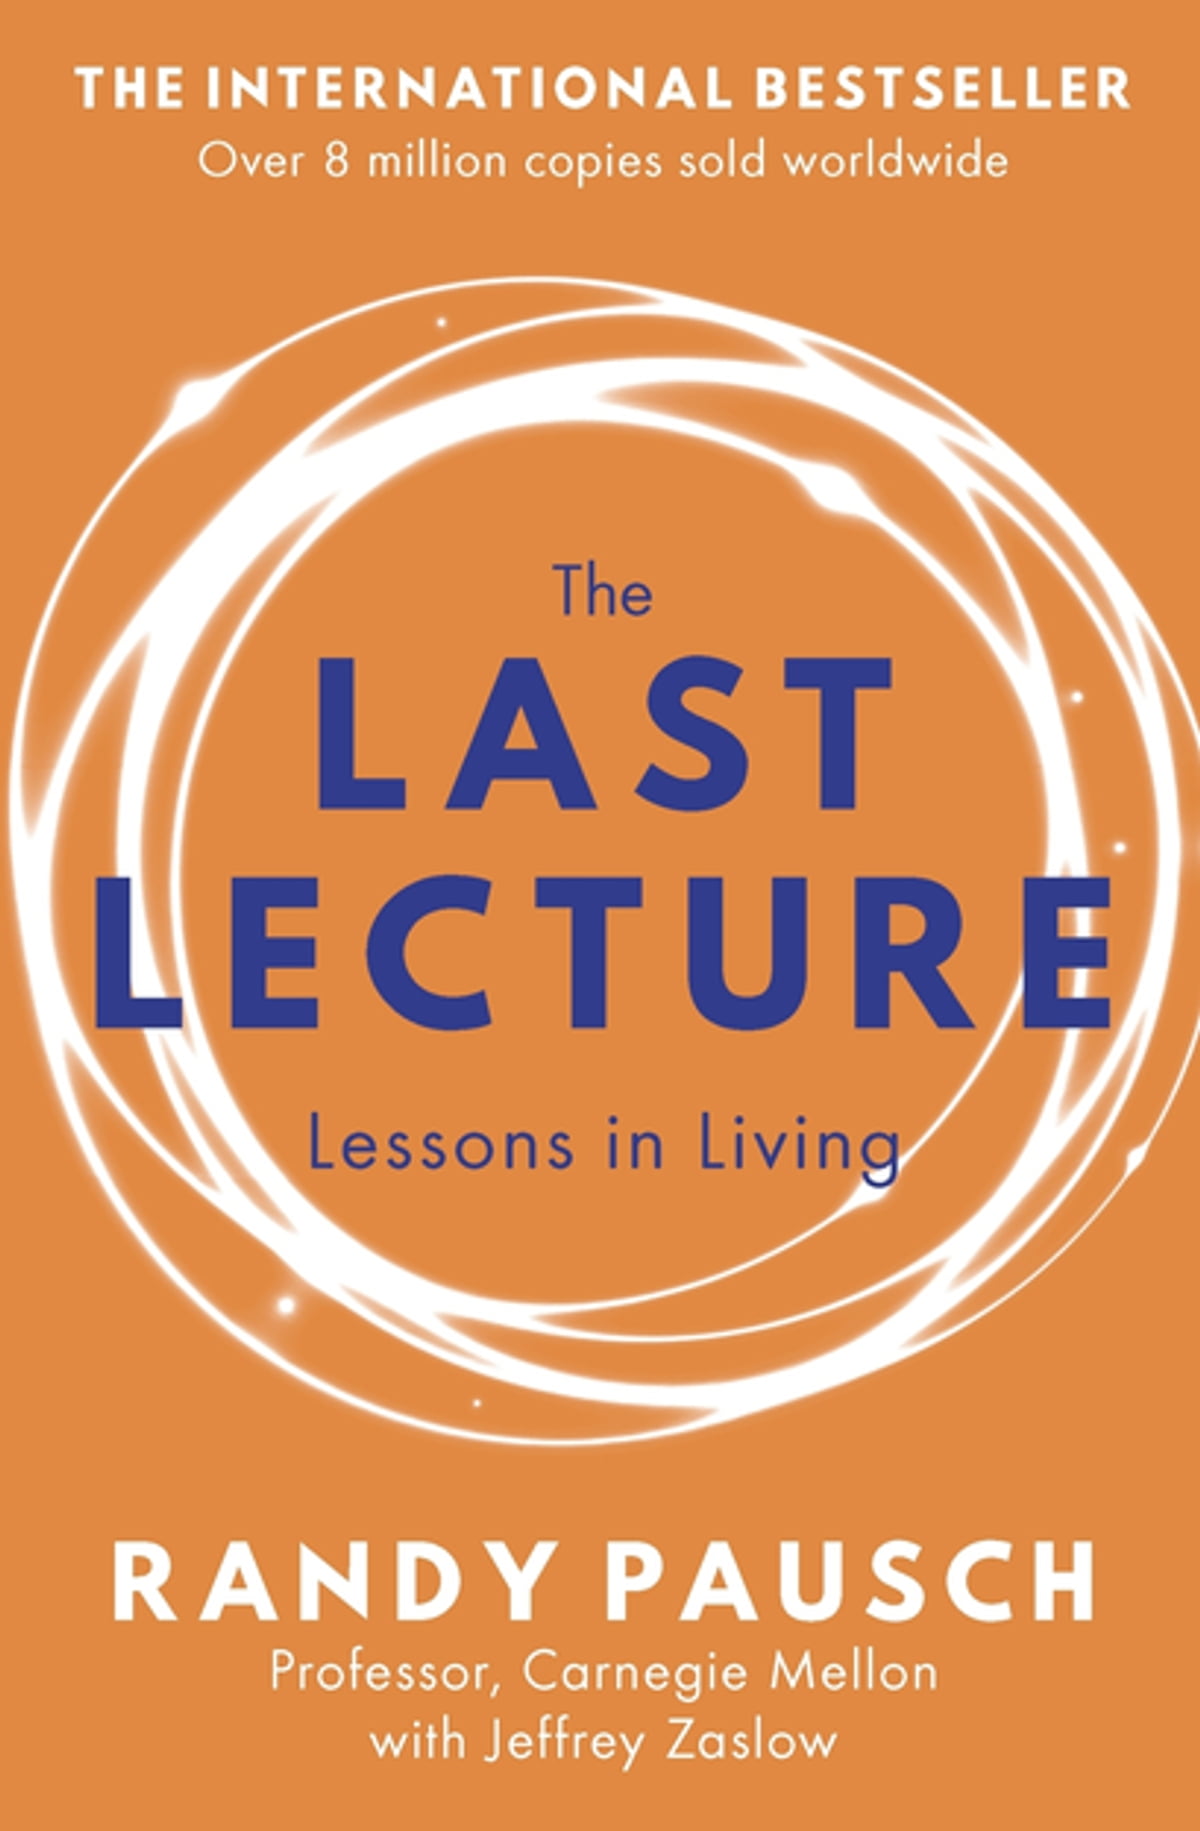 The last lecture by Randy Pausch